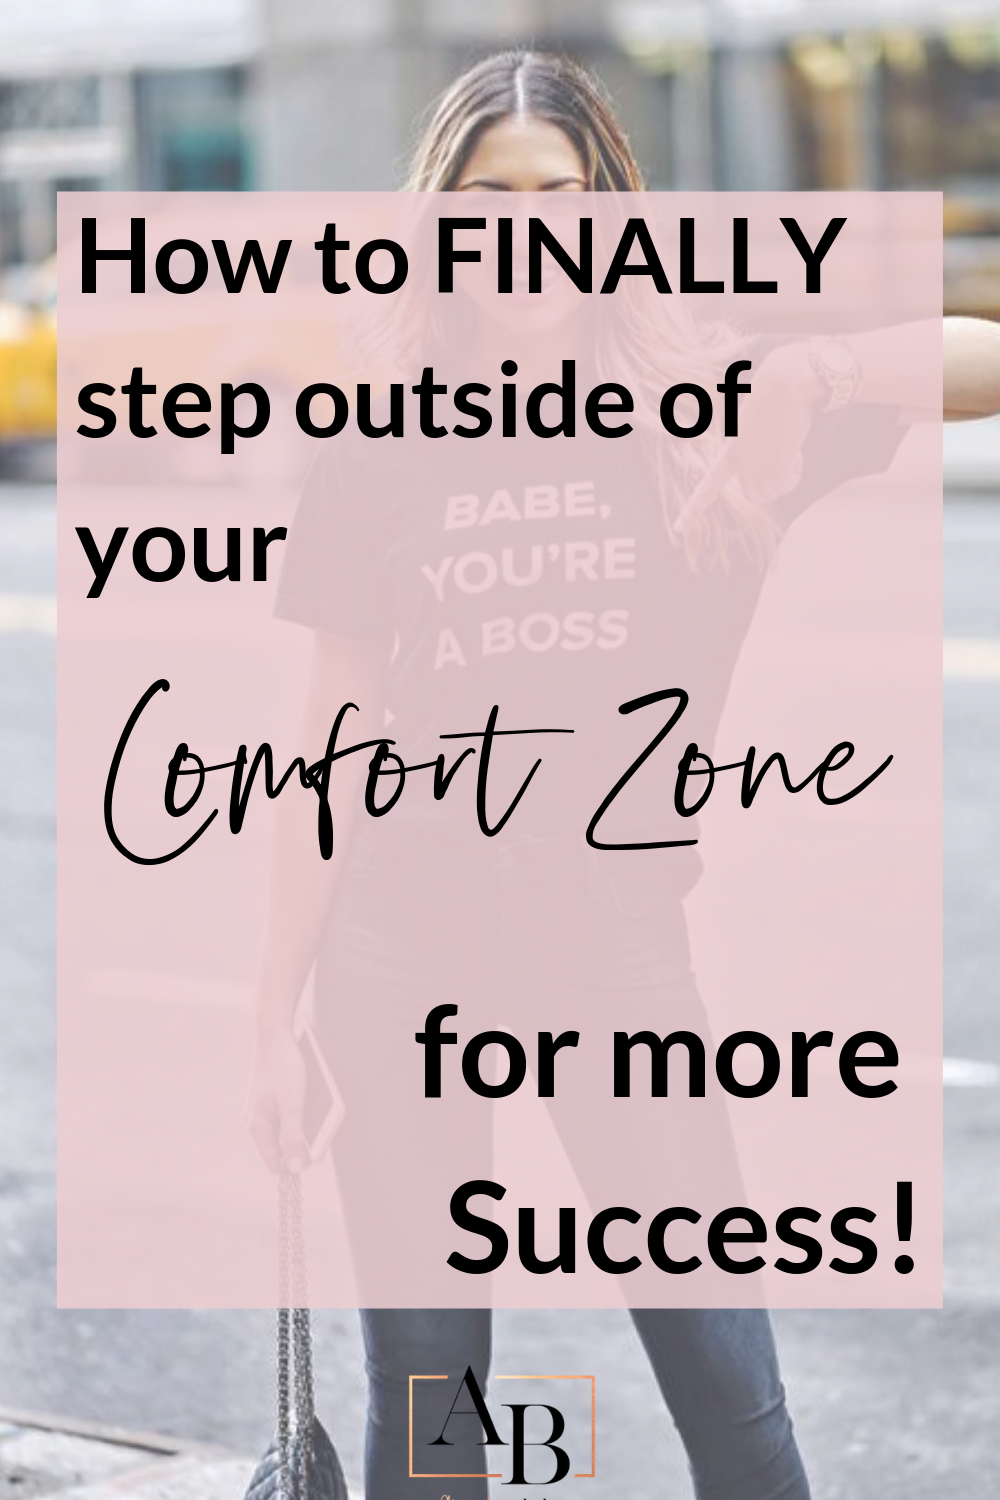 How to step outside of your comfort zone for Girl Boss success!